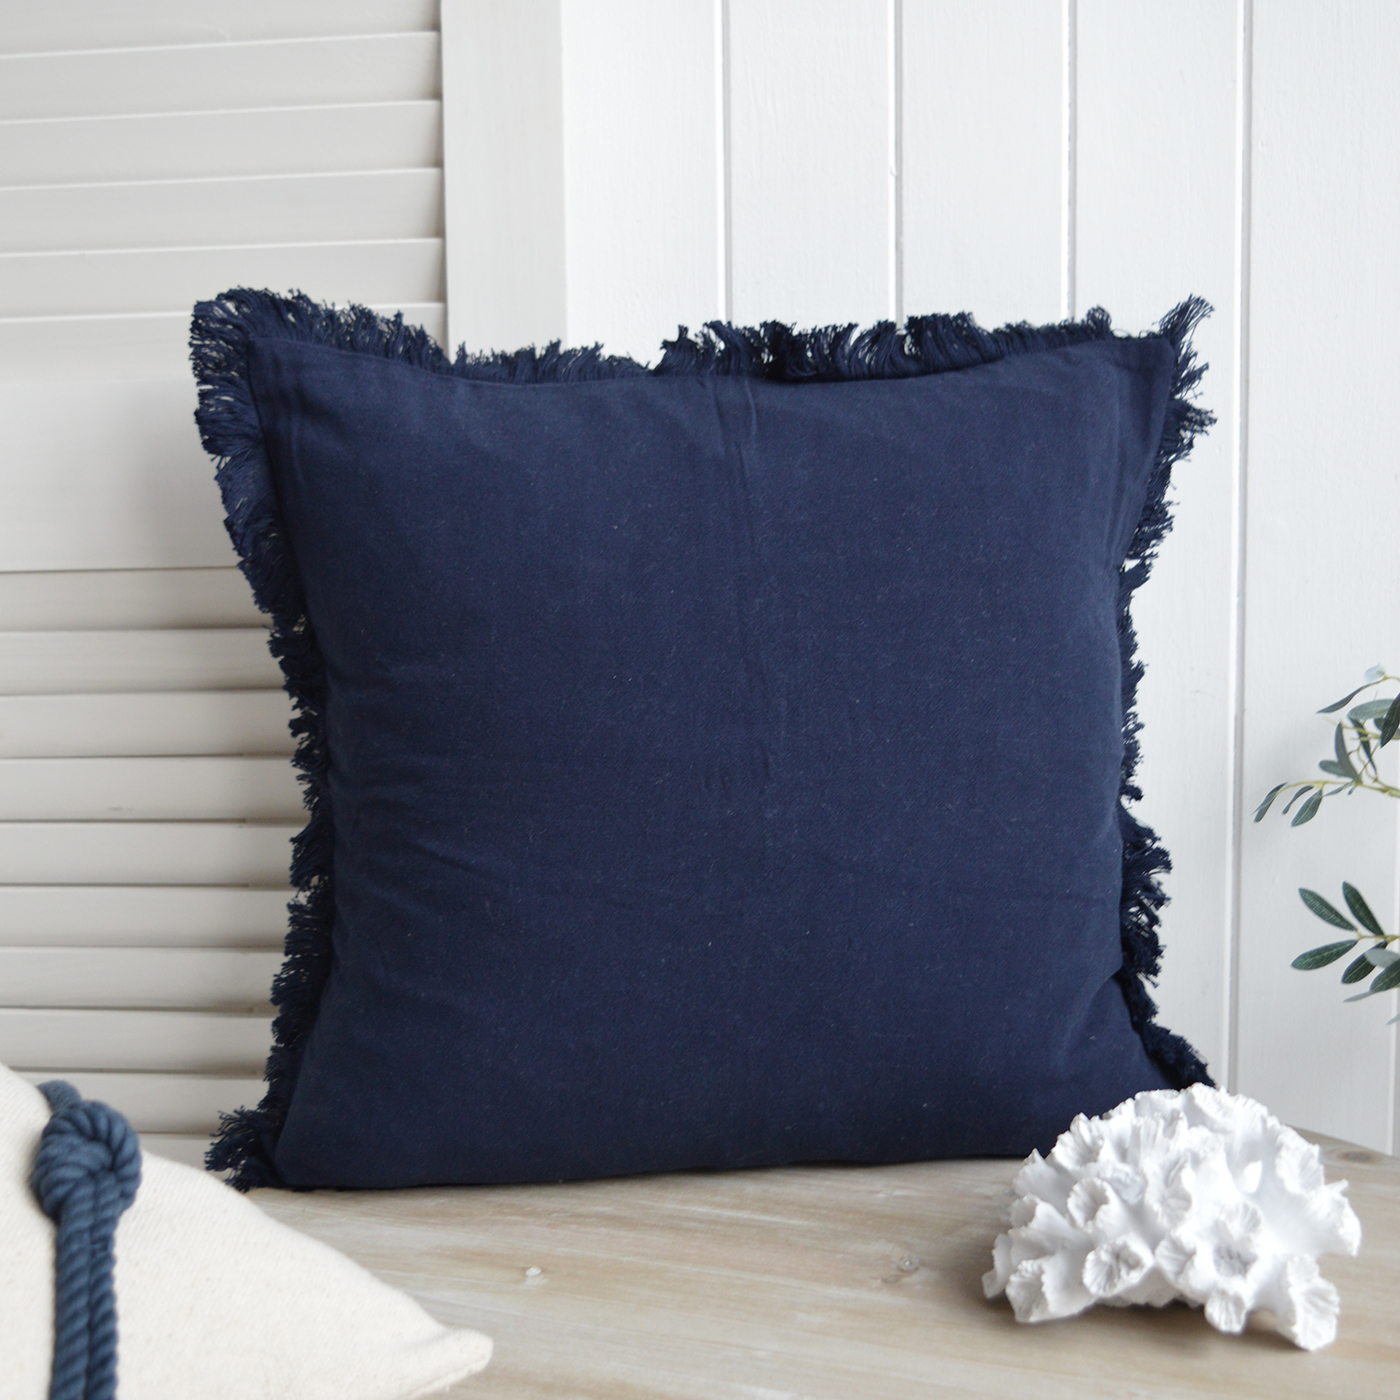 New England Style Country, Coastal and White Furniture and accessories for the home. Hamptons and New England coastal cushions and soft furnishings - Lexington Navy Blue CUshion Cover